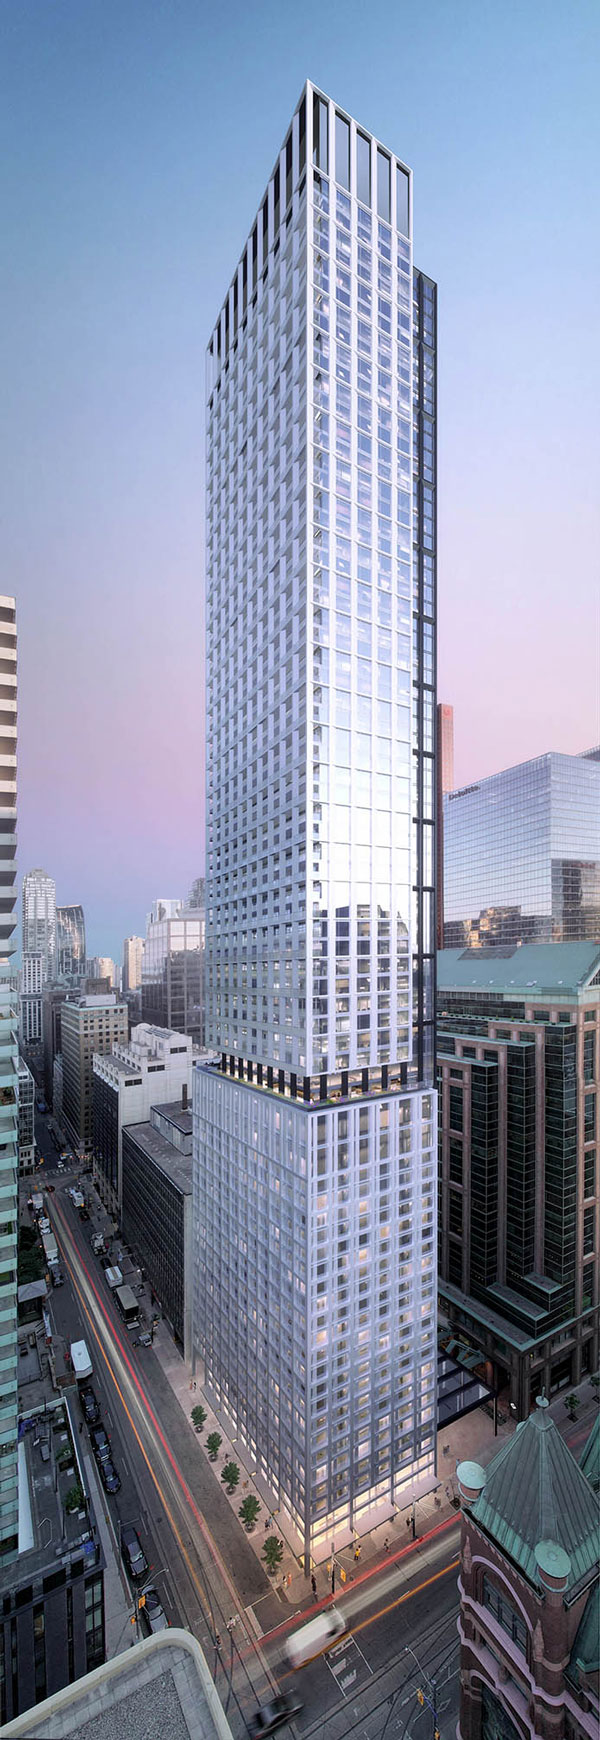 The original 21-storey building will be stripped to its concrete core and shell. Fifty new storeys will be added on top to create a 71-storey mixed-used development.